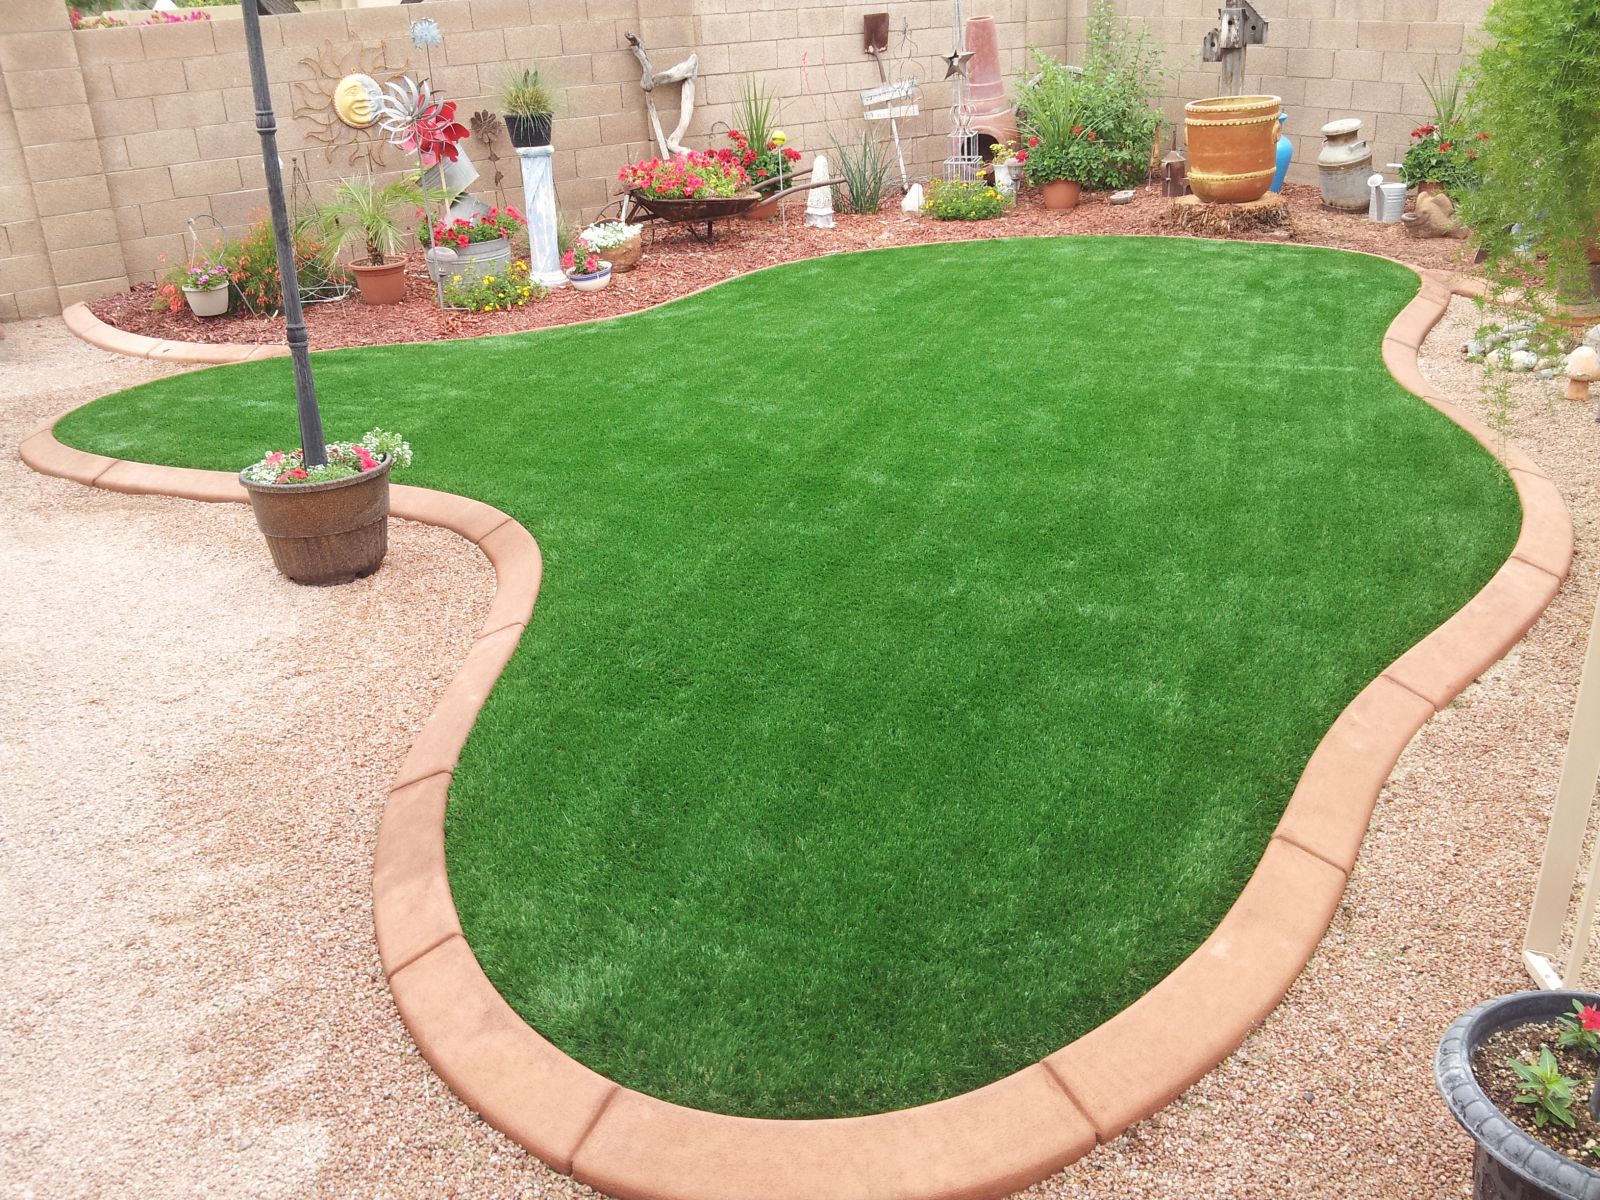 Get Help From the Best Fake Grass Installers in Mesa, AZ